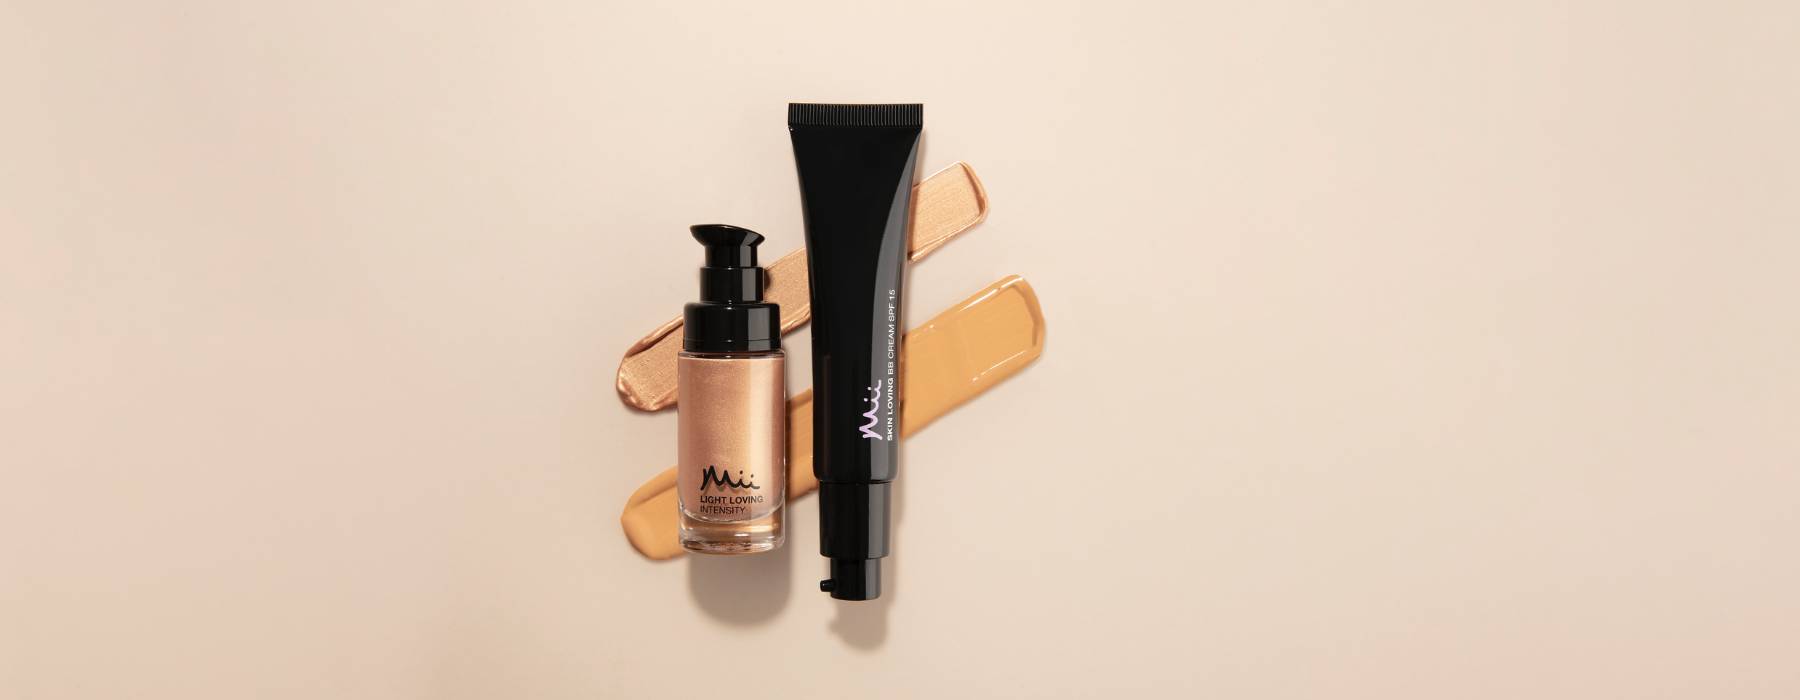 Get Glowing With Mii